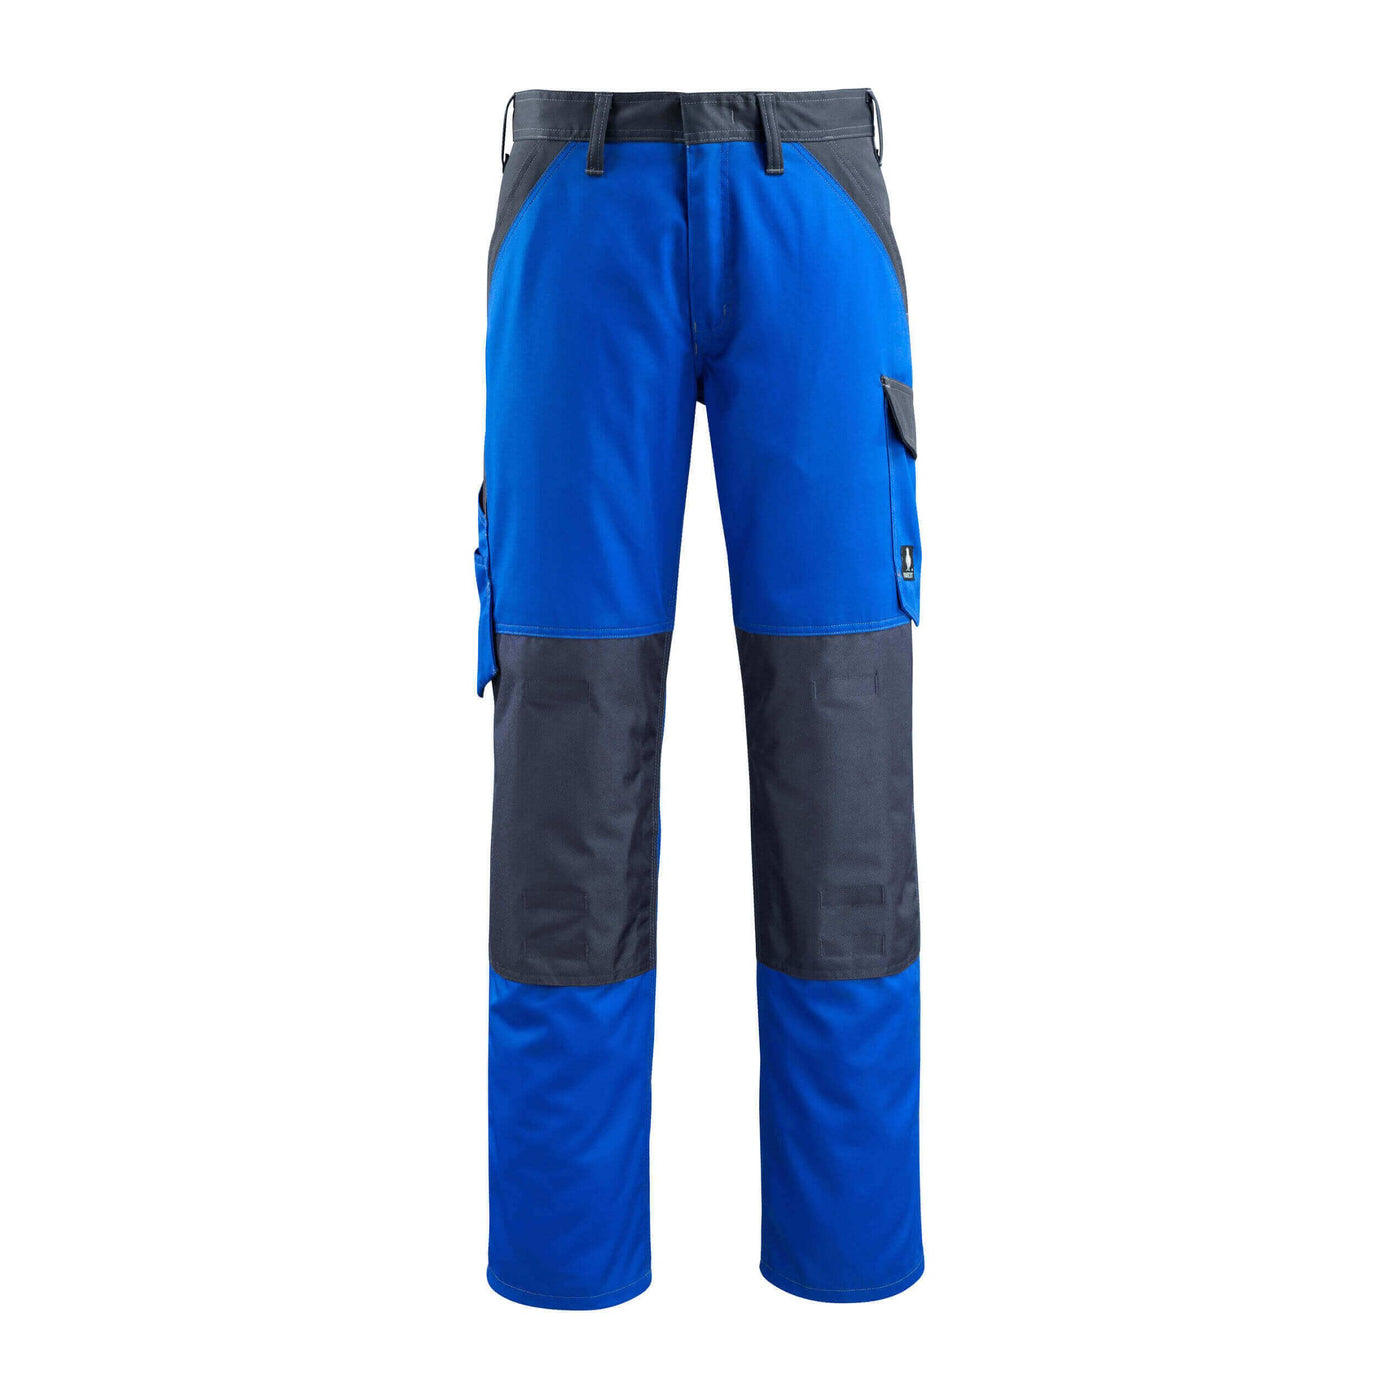 Mascot Temora Work Trousers 15779-330 Front #colour_royal-blue-dark-navy-blue